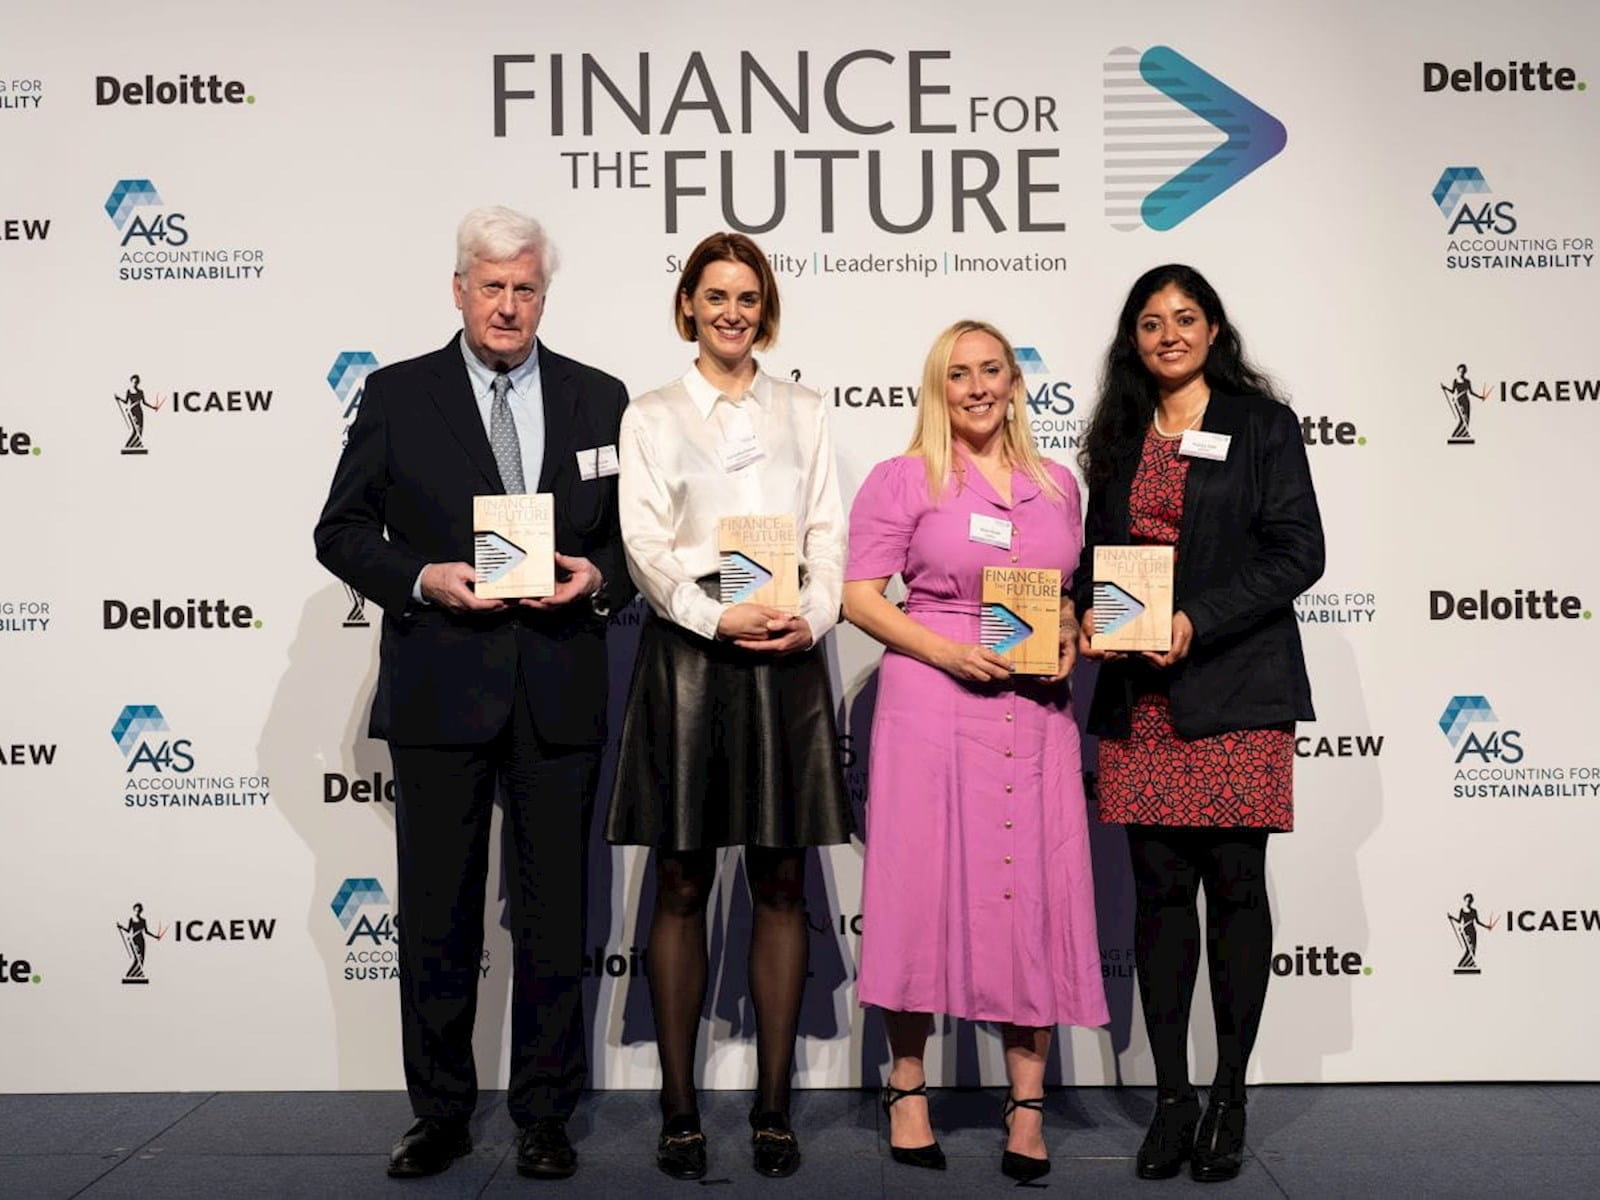 A photograph from the Finance for the Future Awards ceremony